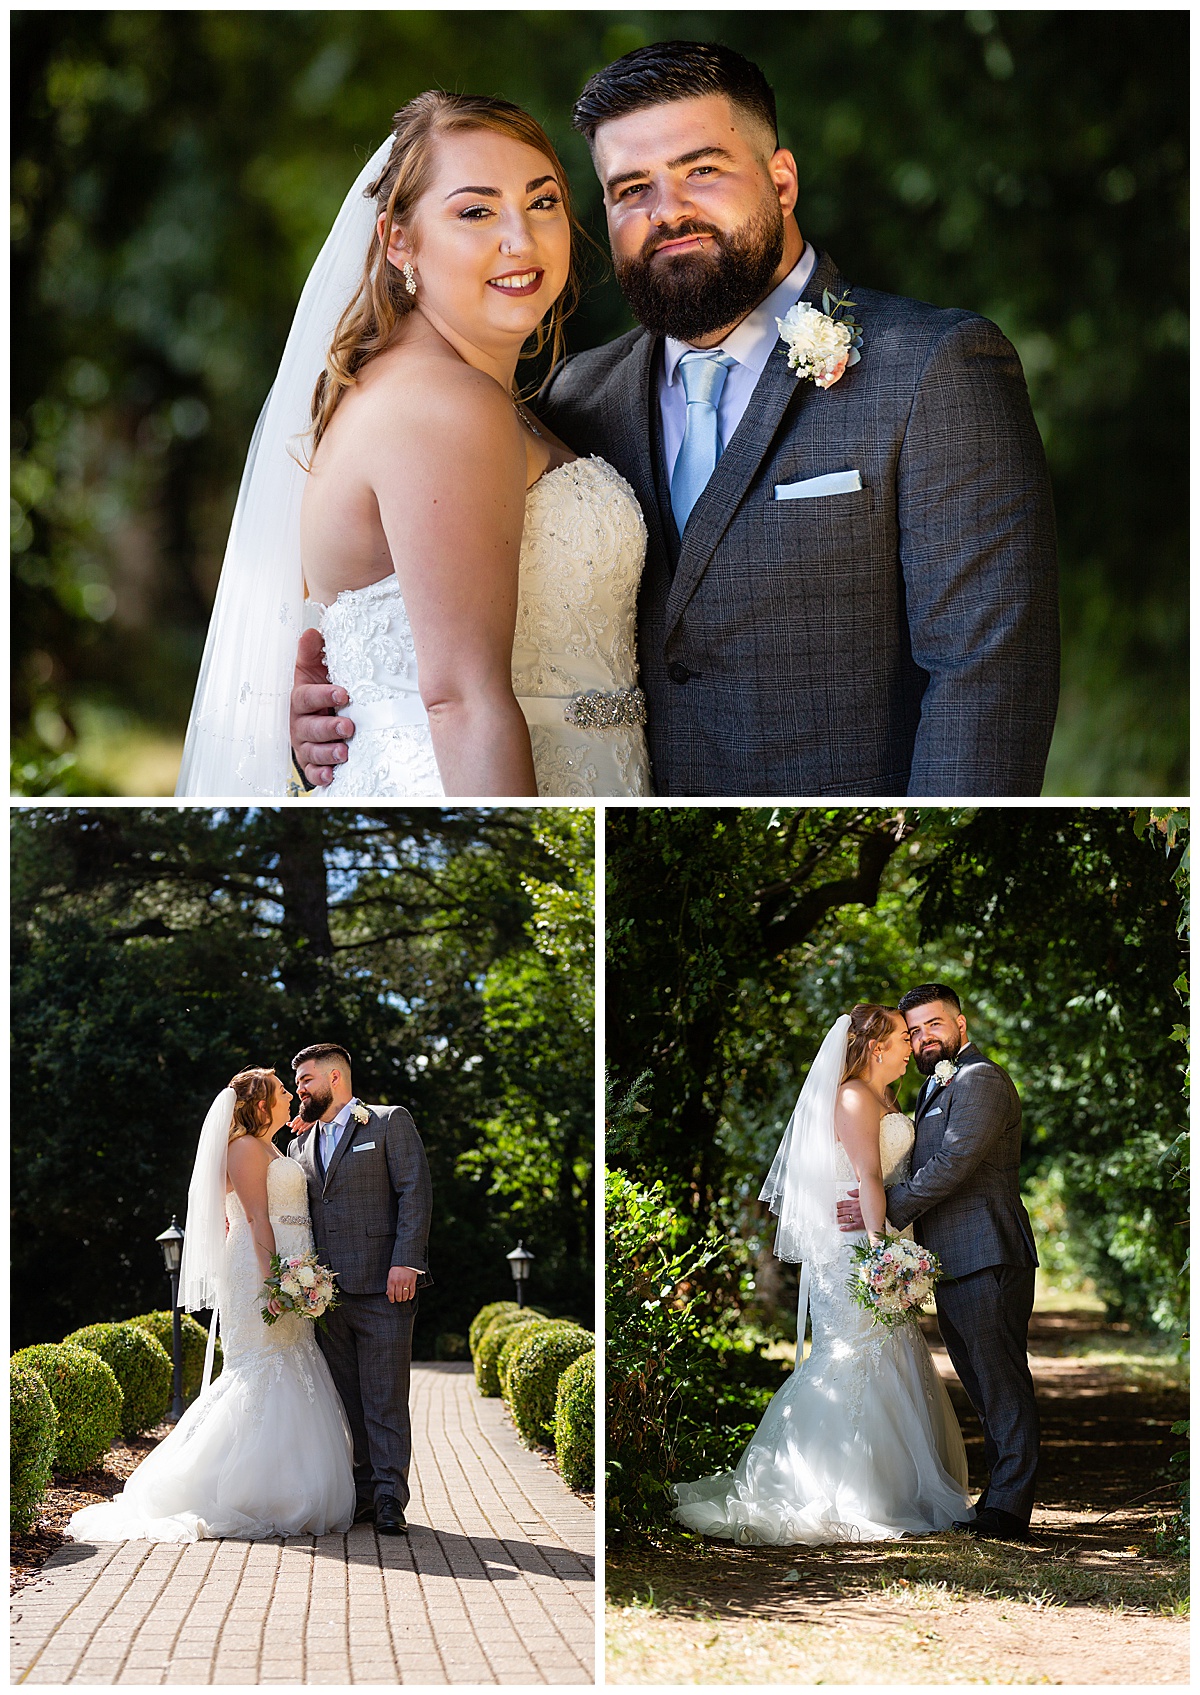 Becca-Jay-Audleys-Wood-Basingstoke-Wedding-Photography-by-Millie-and-Max